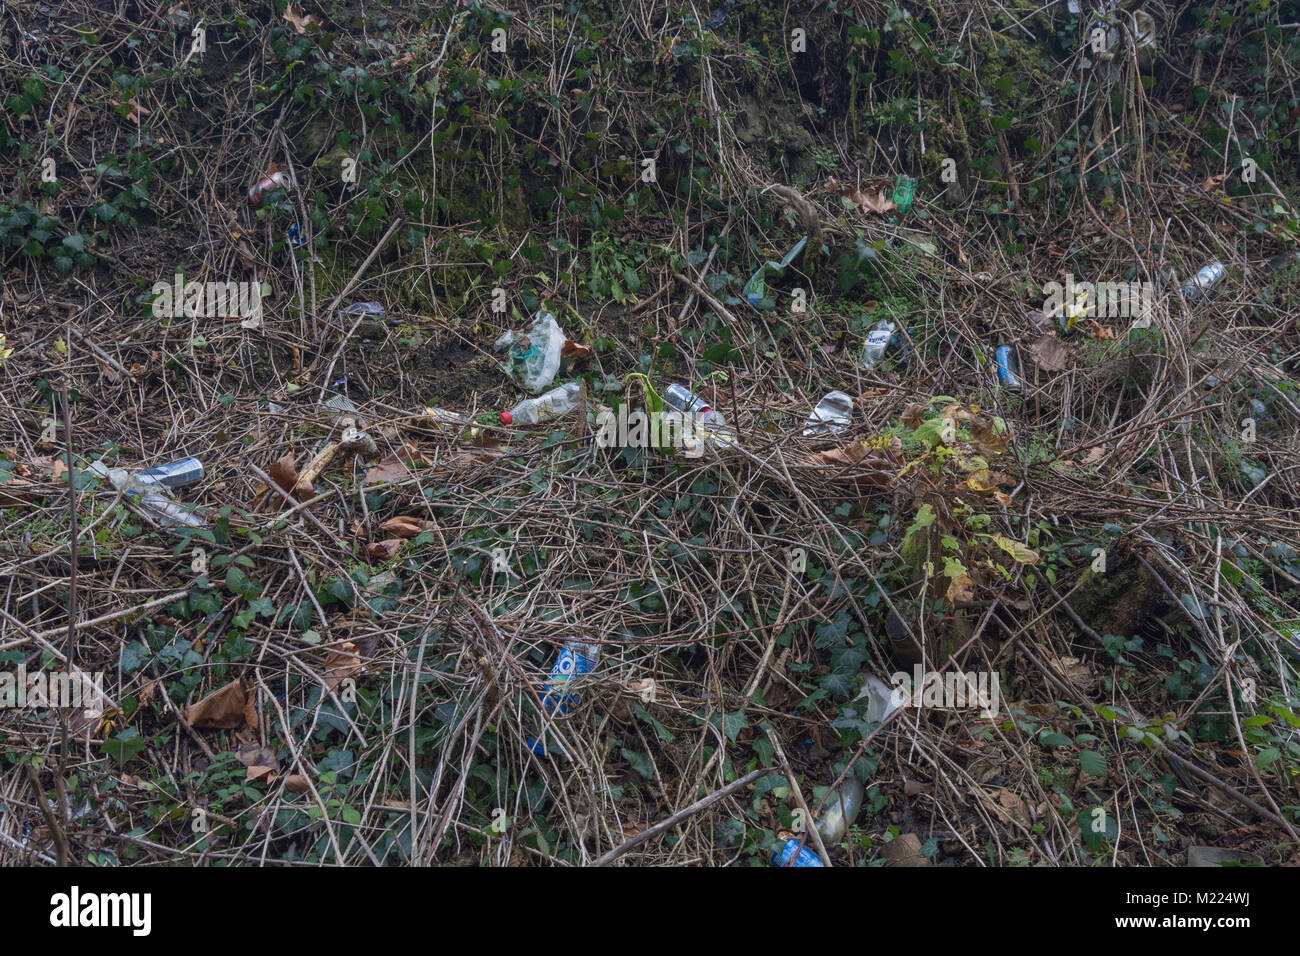 Plastic bottle washed up on marshy area - metaphor for environmental pollution, plastic pollution / plastic waste in the countryside / war on plastic. Stock Photo